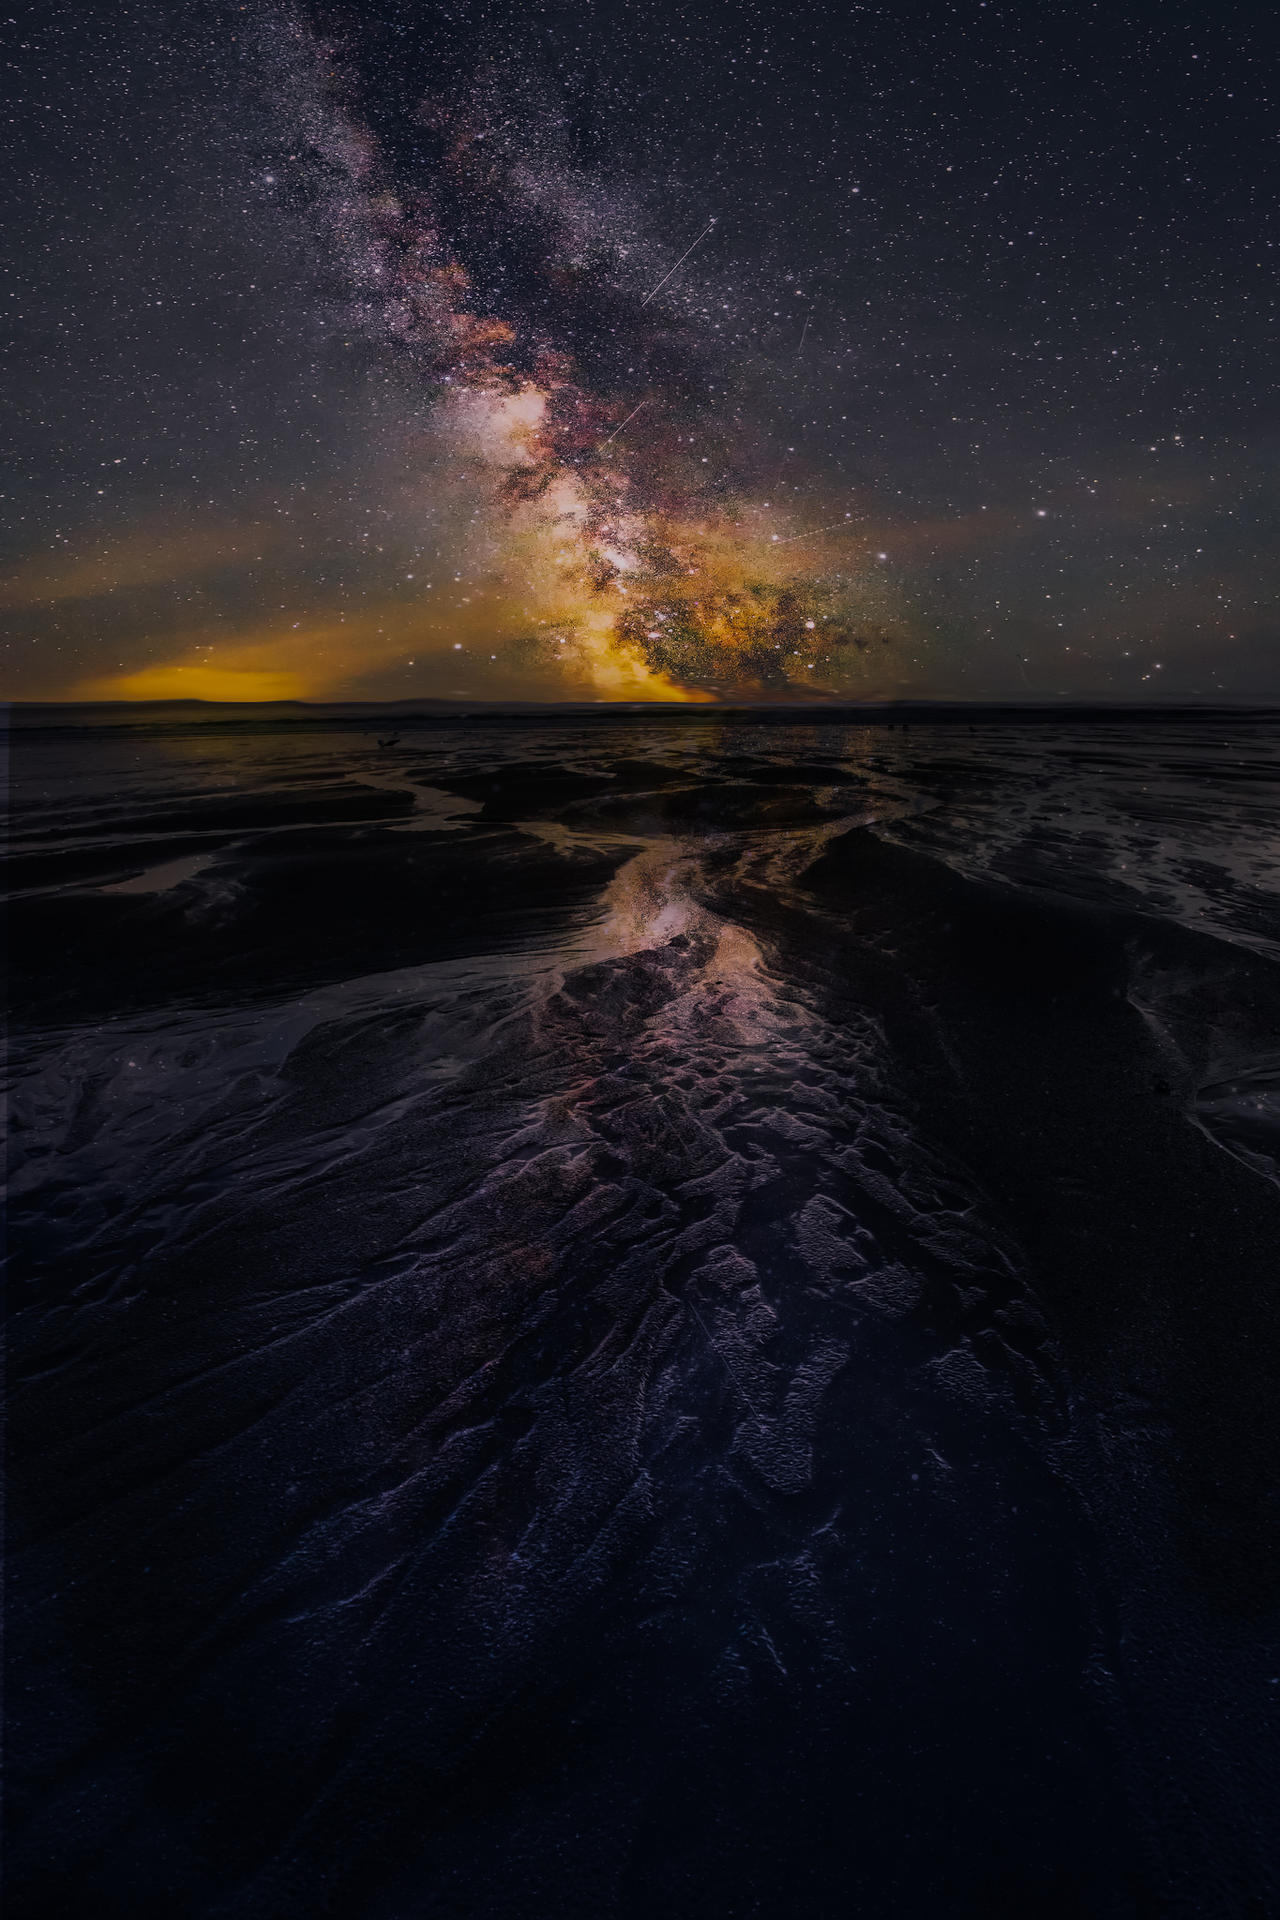 19 Awe-Inspiring Astrophotography Images | Photocrowd Photography Blog